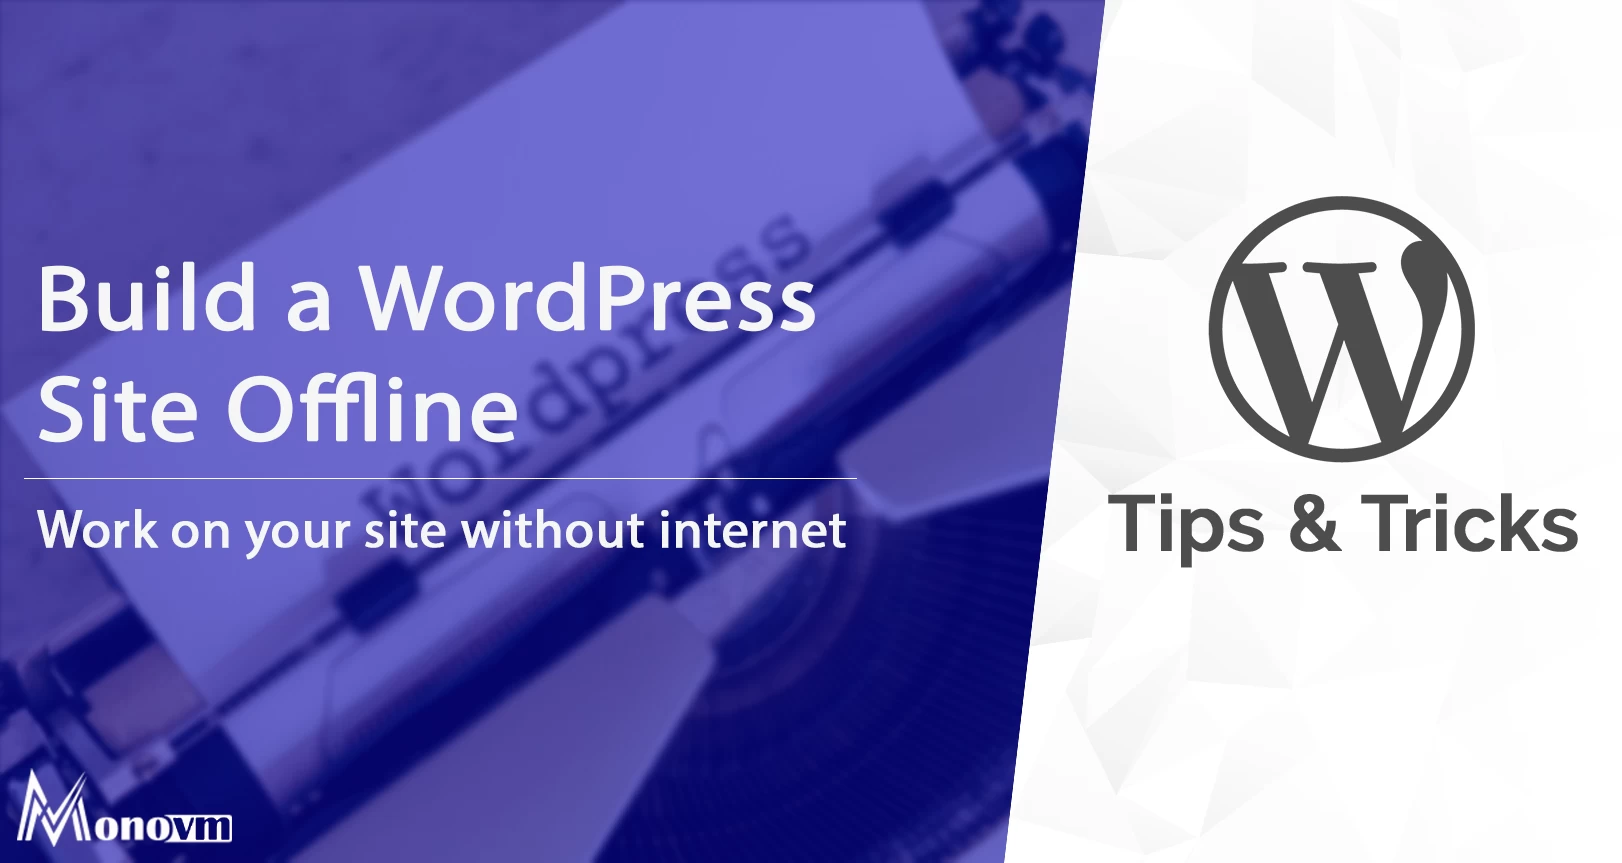 How to Build a WordPress Site Without Going Live